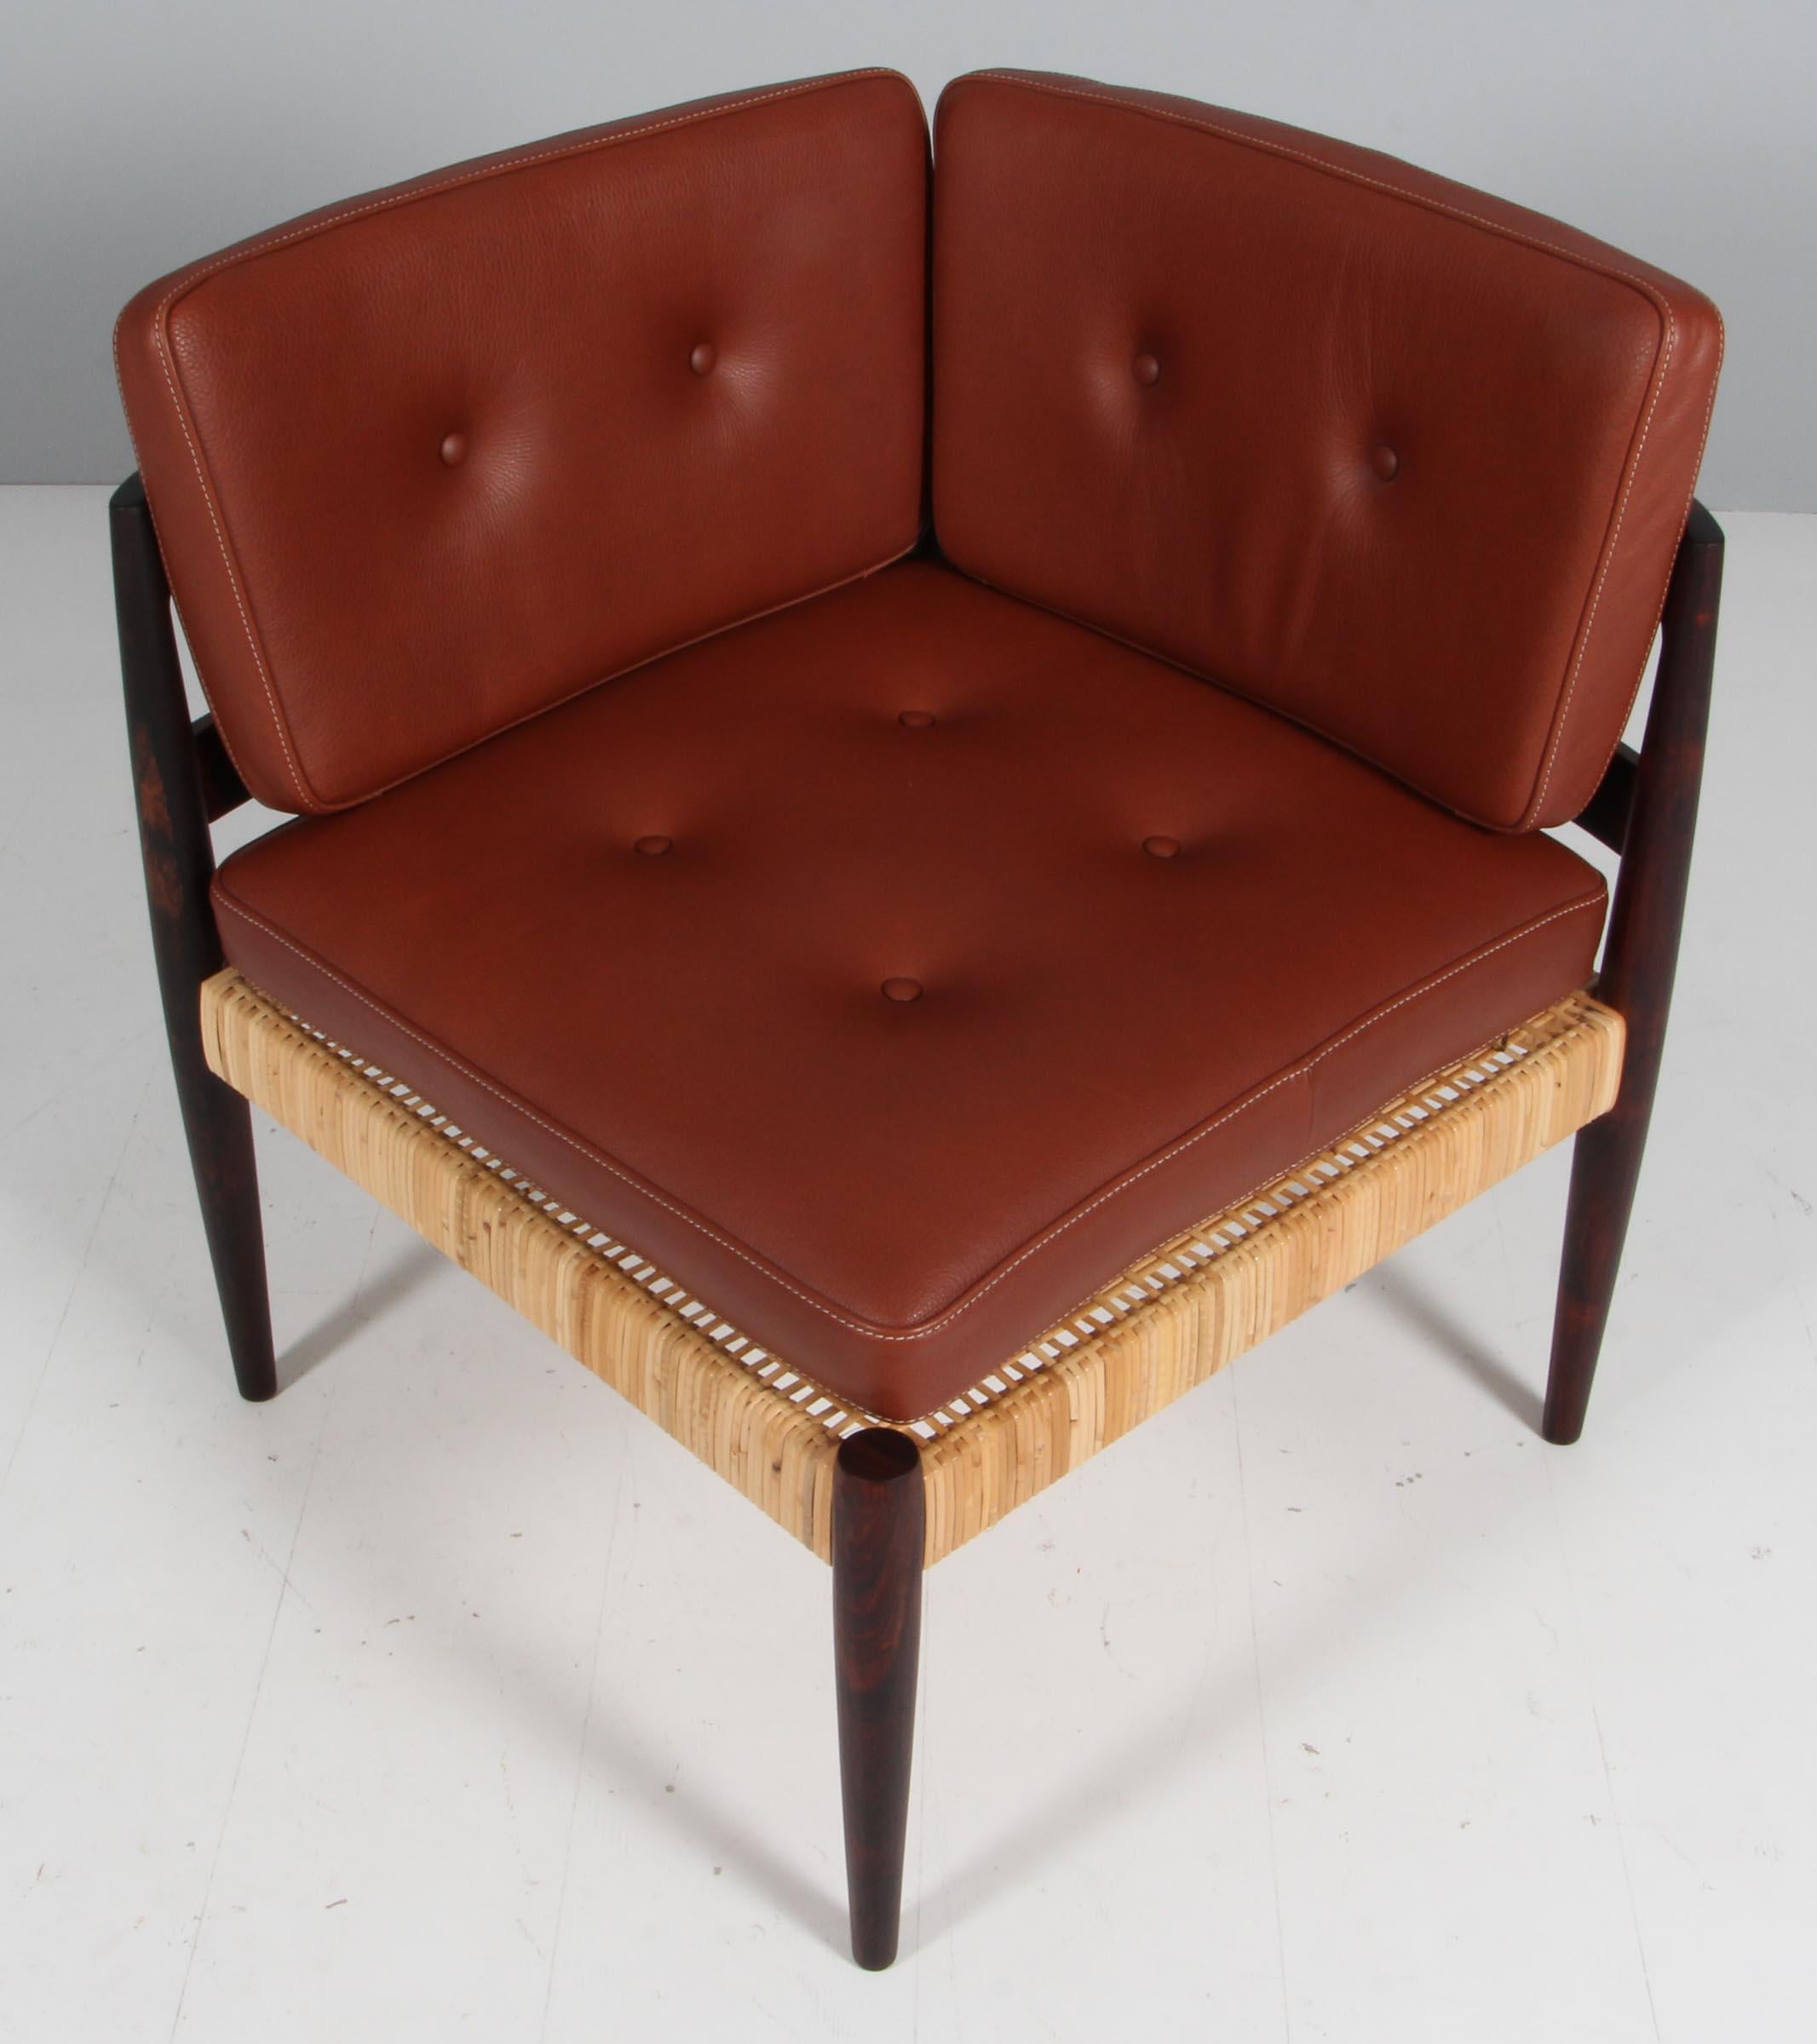 Kai Kristiansen Corner chair in rosewood, cane and leather cushion.

Model Univers, made by Magnus Olsen.